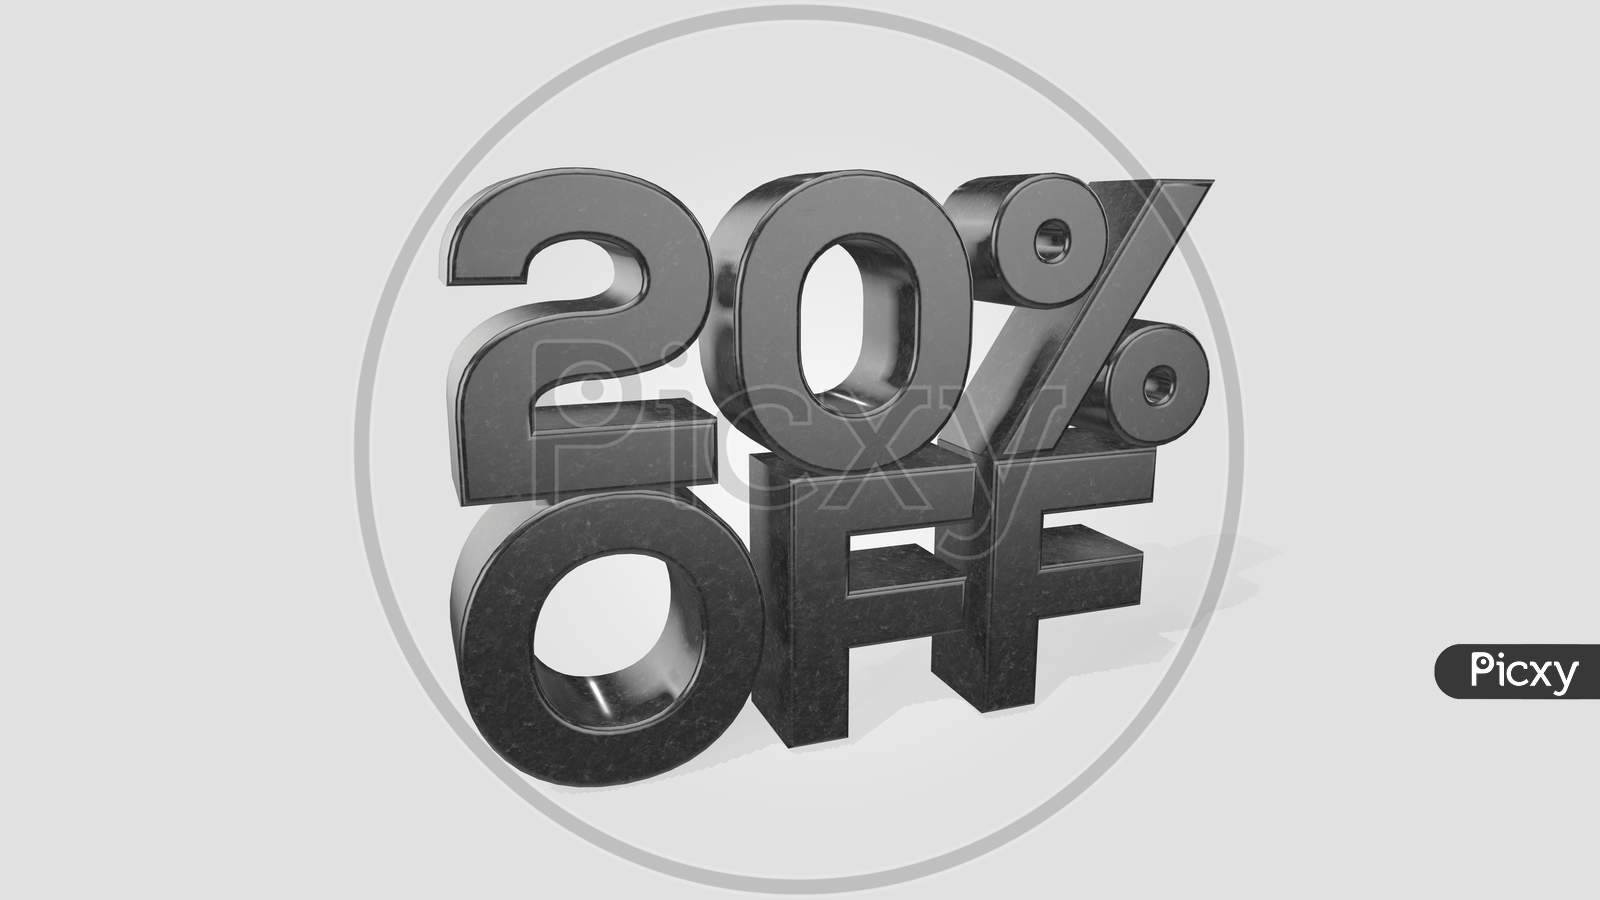 20% Off 3D Illustration Use For Landing Page, Template, Ui, Web, Poster, Banner, Flyer, Background, Gift Card, Coupon, Label, Wallpaper,Sale Promotion,Advertising, Marketing